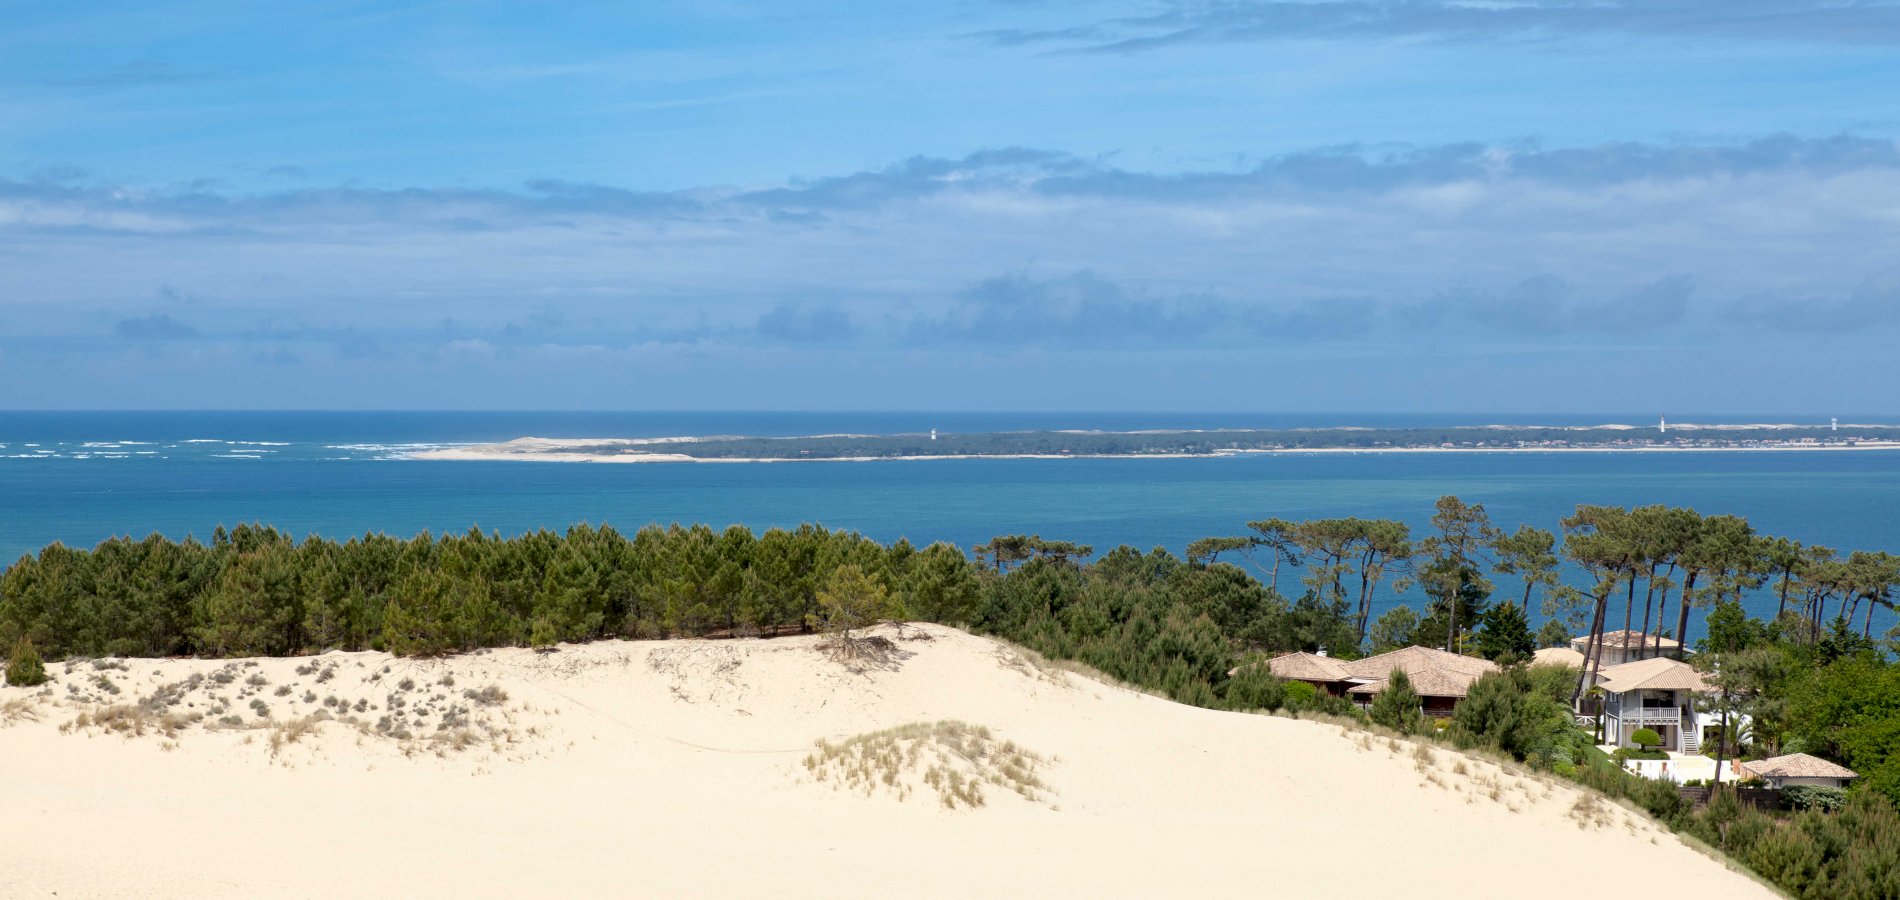 Ophorus Tours - Arcachon Bay & Pilat Sand Dune Private Day Trip From Bordeaux